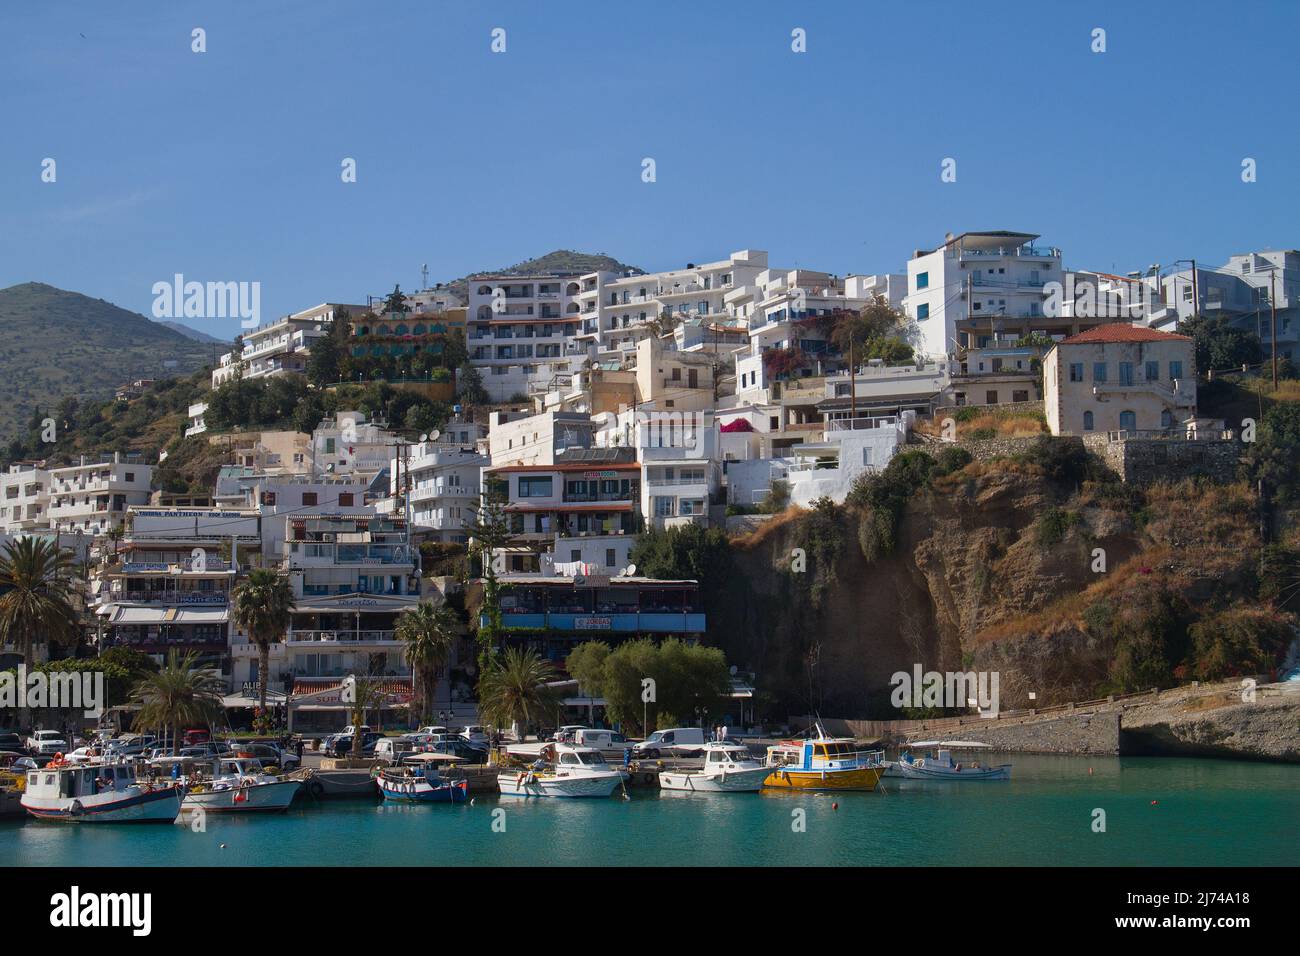 Agia Galini, picturesque mediterranean village with white houses and fishing boats in harbour with blue water Stock Photo